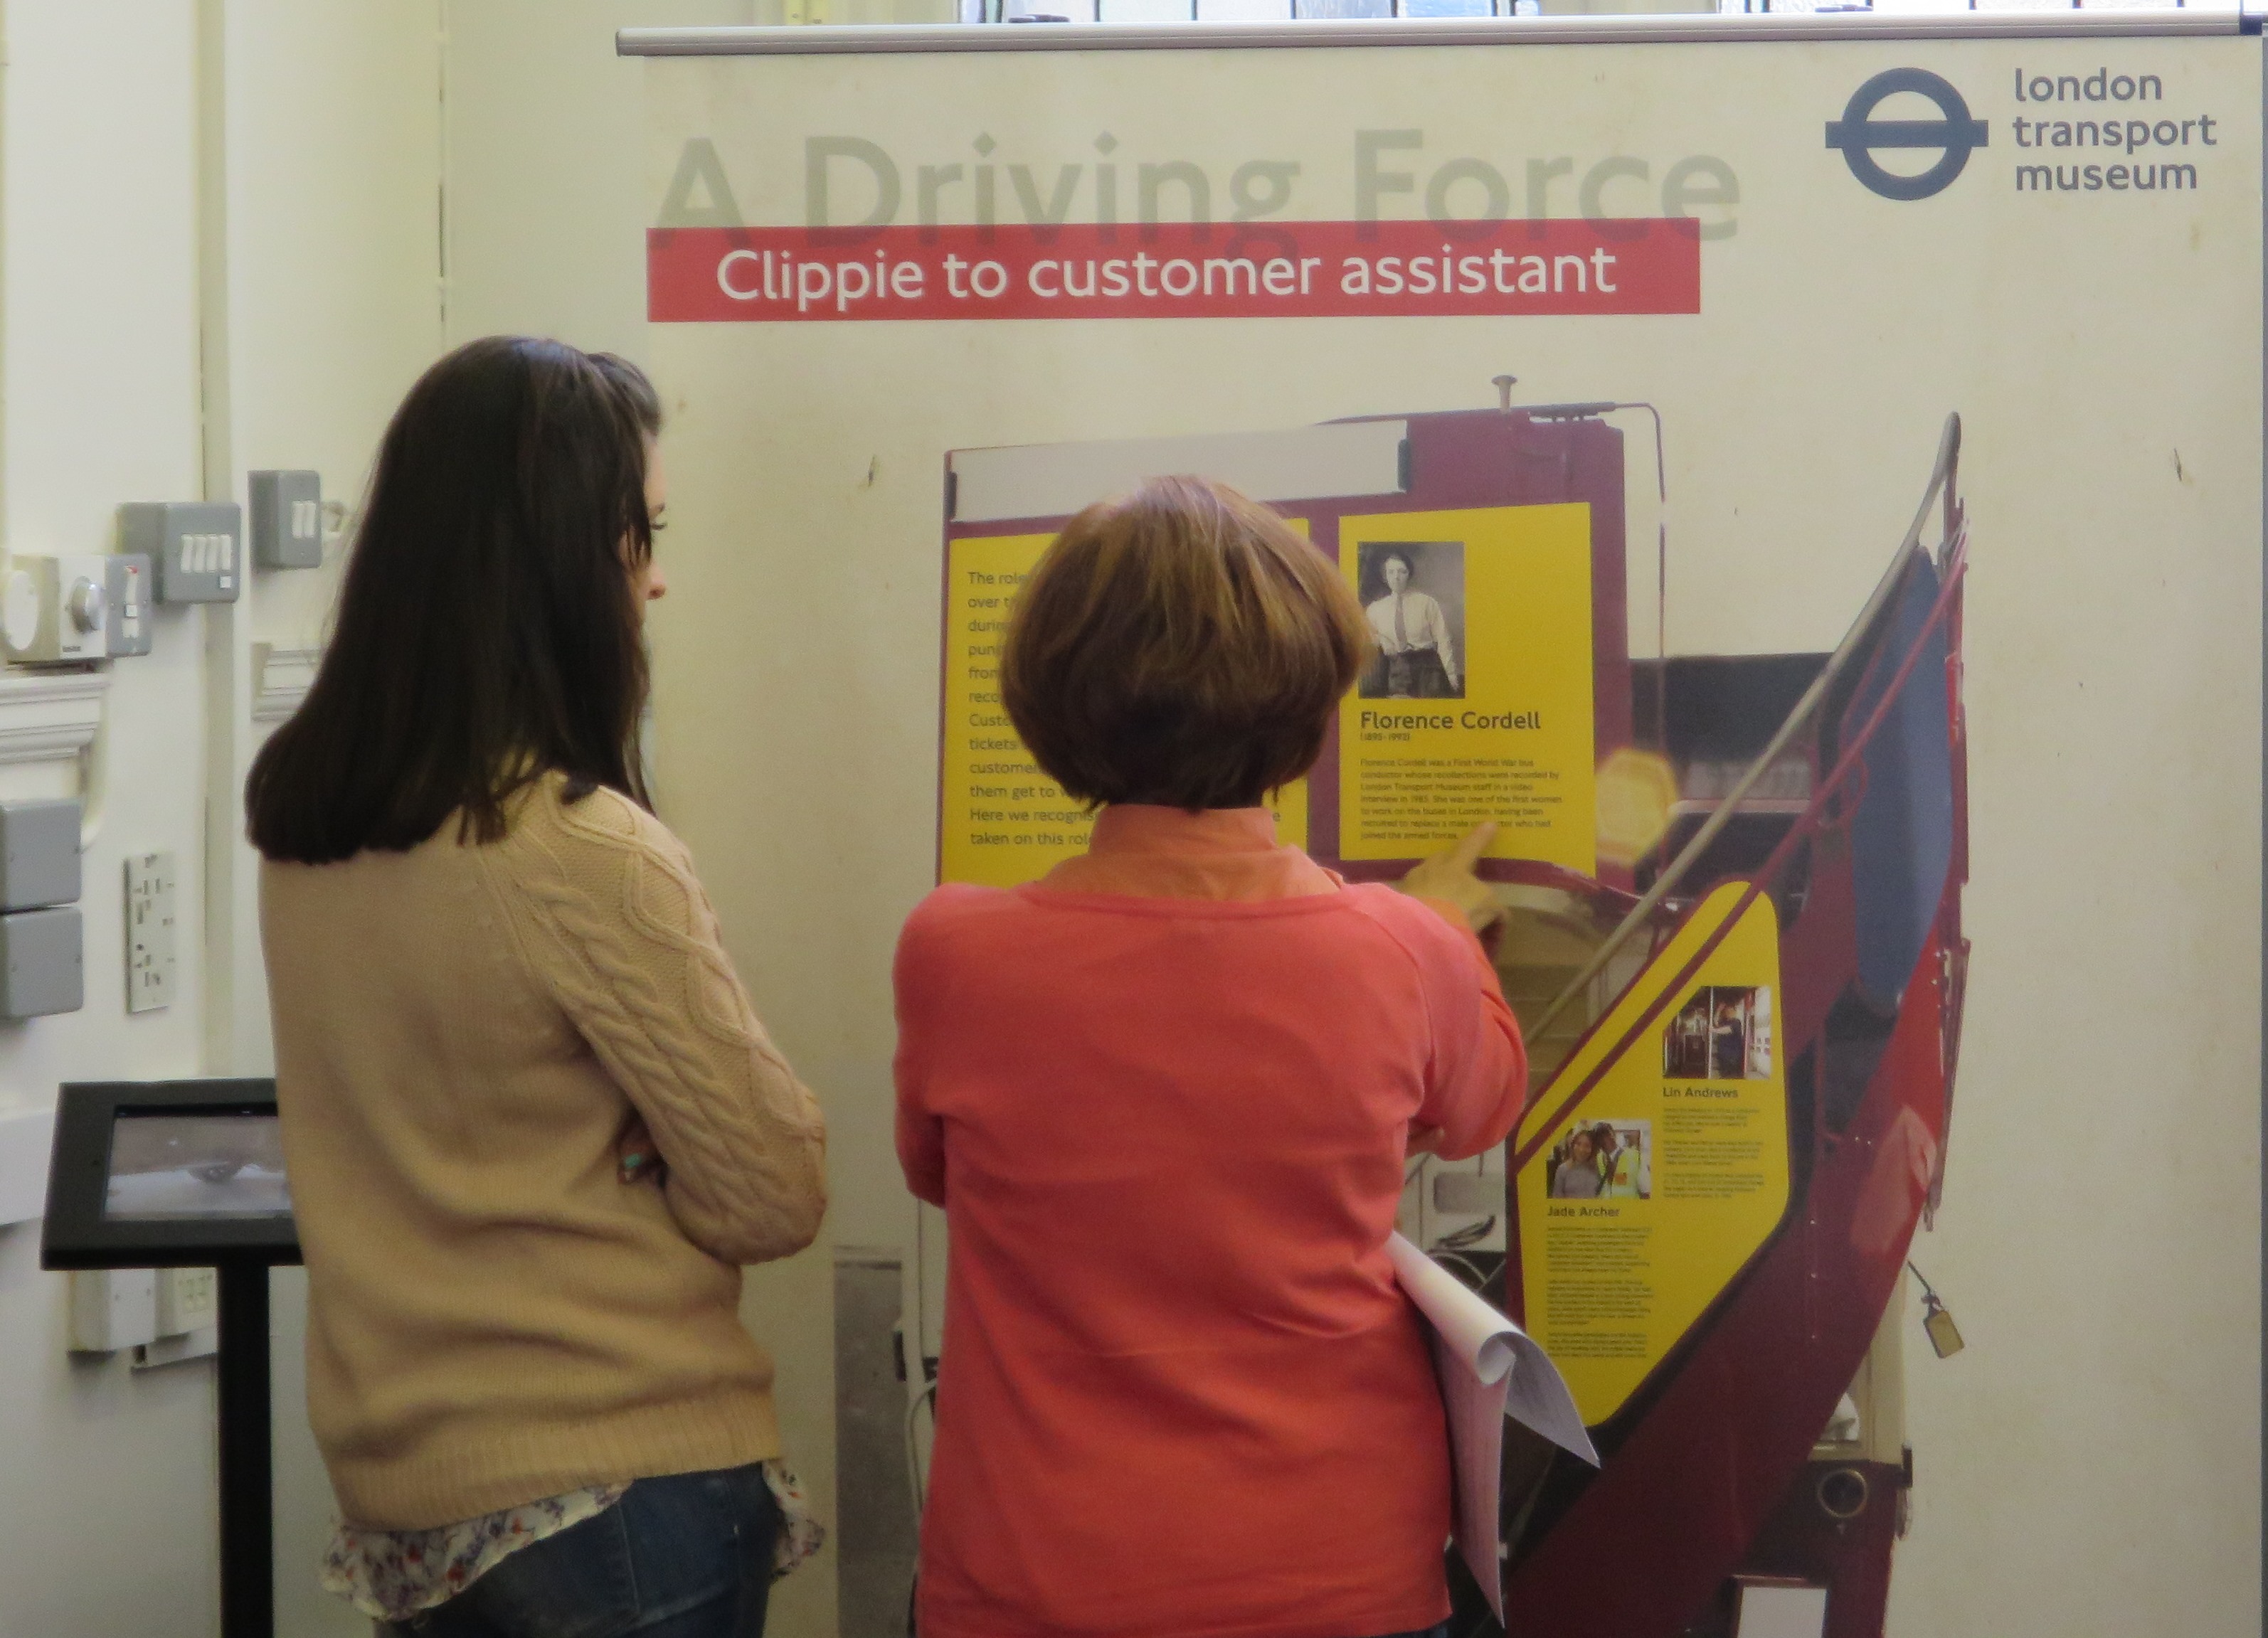 Learning about the women at the heart of London Transport.